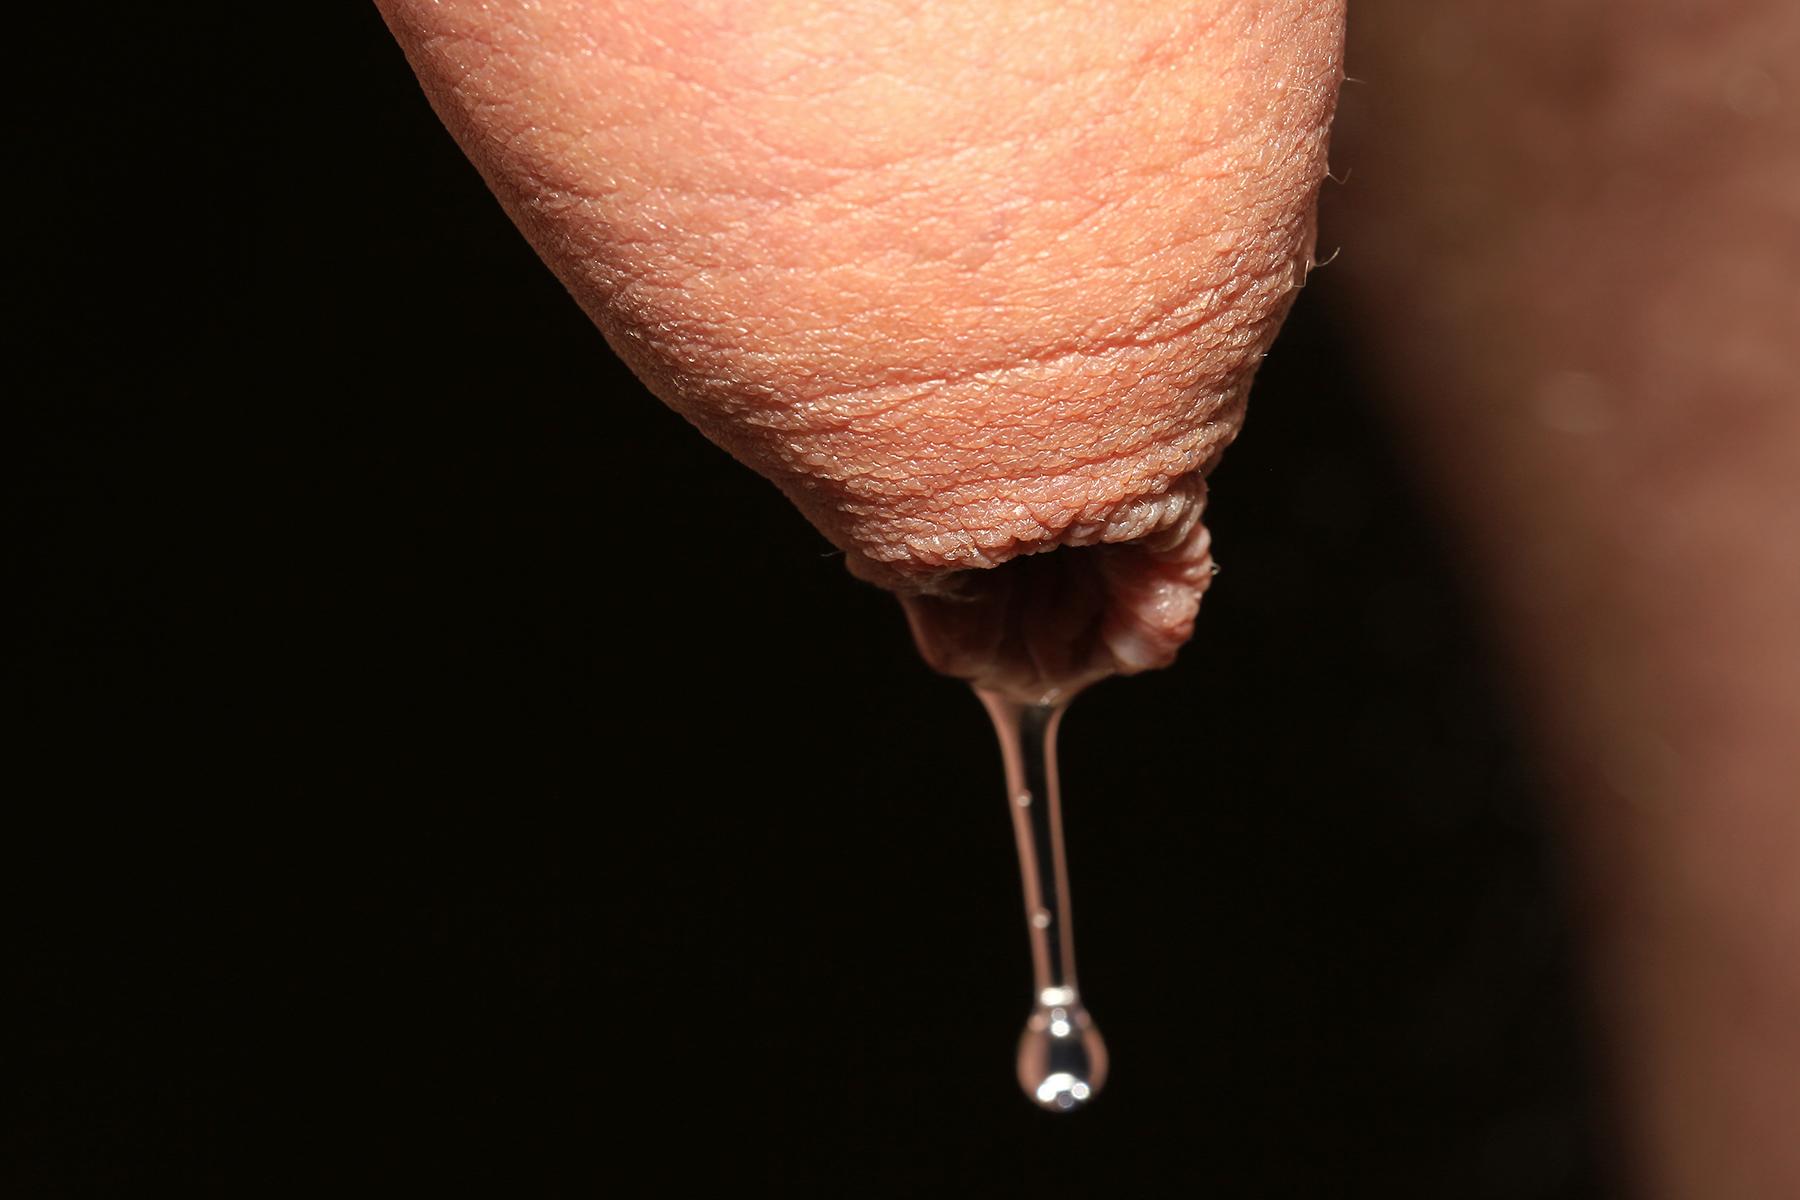 File:Precum dripping from penis.jpg - a close up of a person's tongue with a drop drop drop drop dro